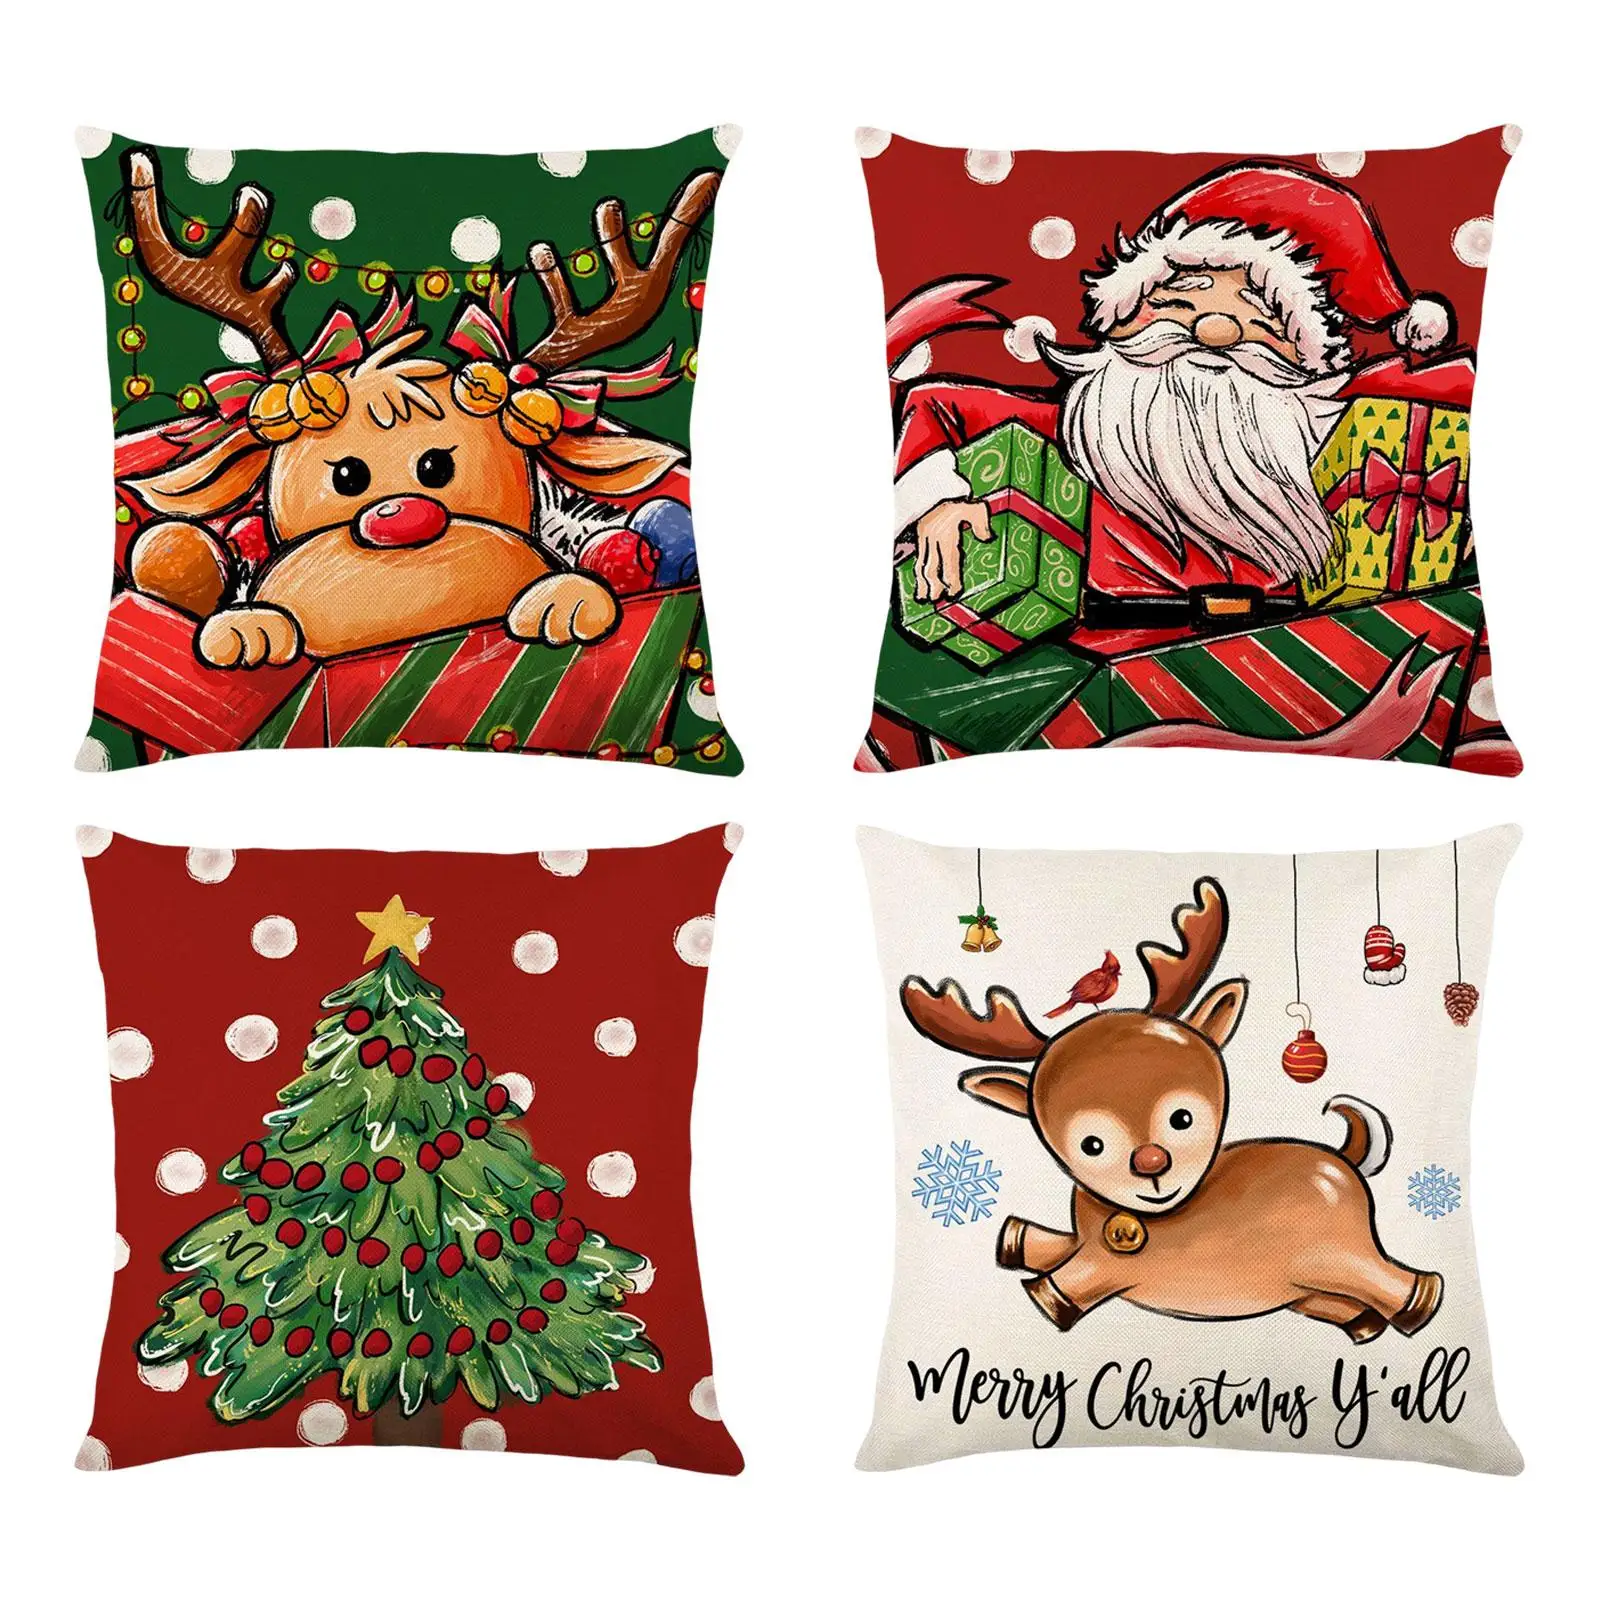 Multicolor Christmas Pillow Cover Cushion Couch Cover Pillow Case Pillowcase for Xmas Decoration Living Room Farmhouse